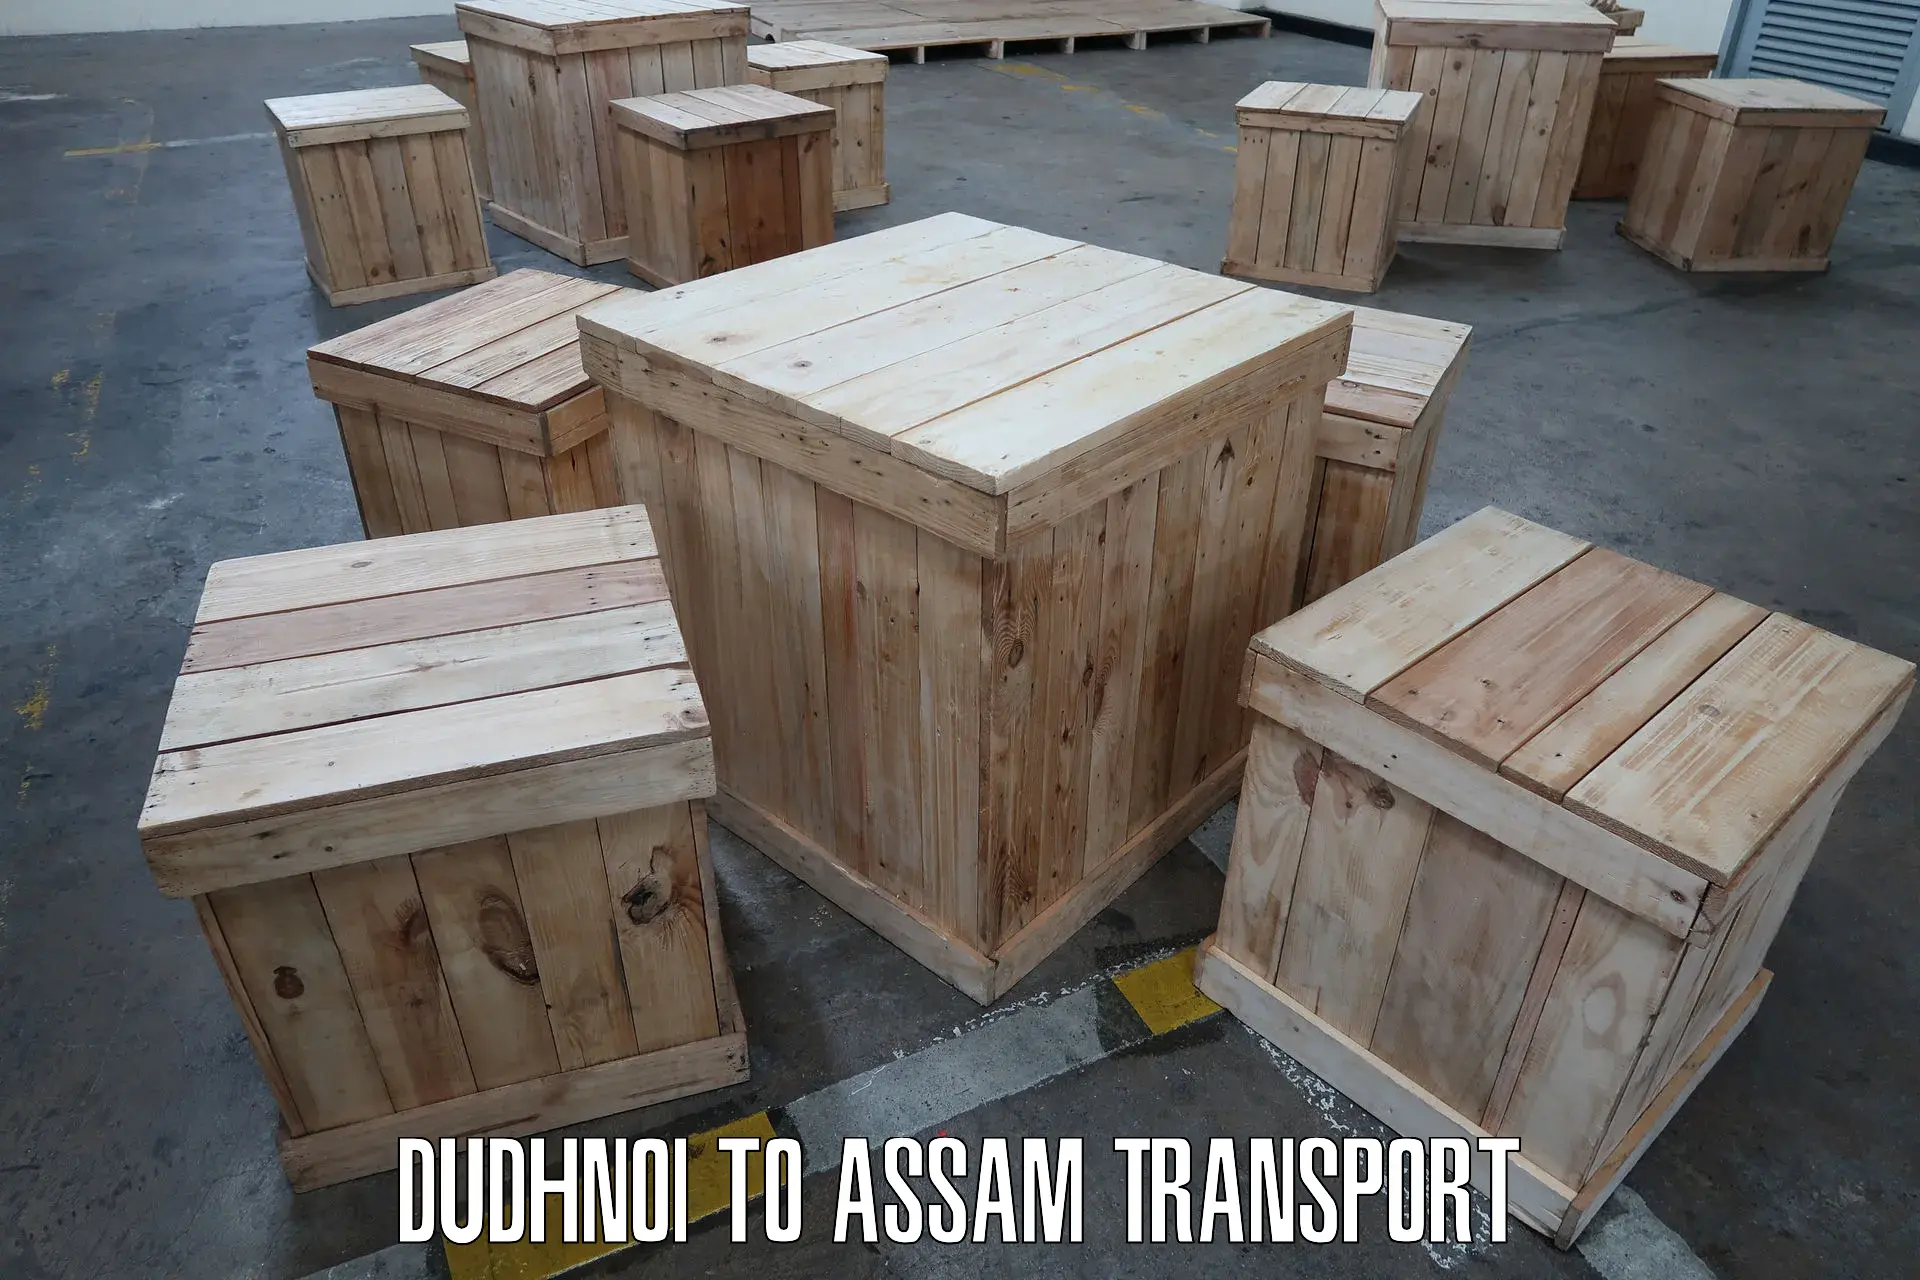 Air freight transport services Dudhnoi to Lala Assam